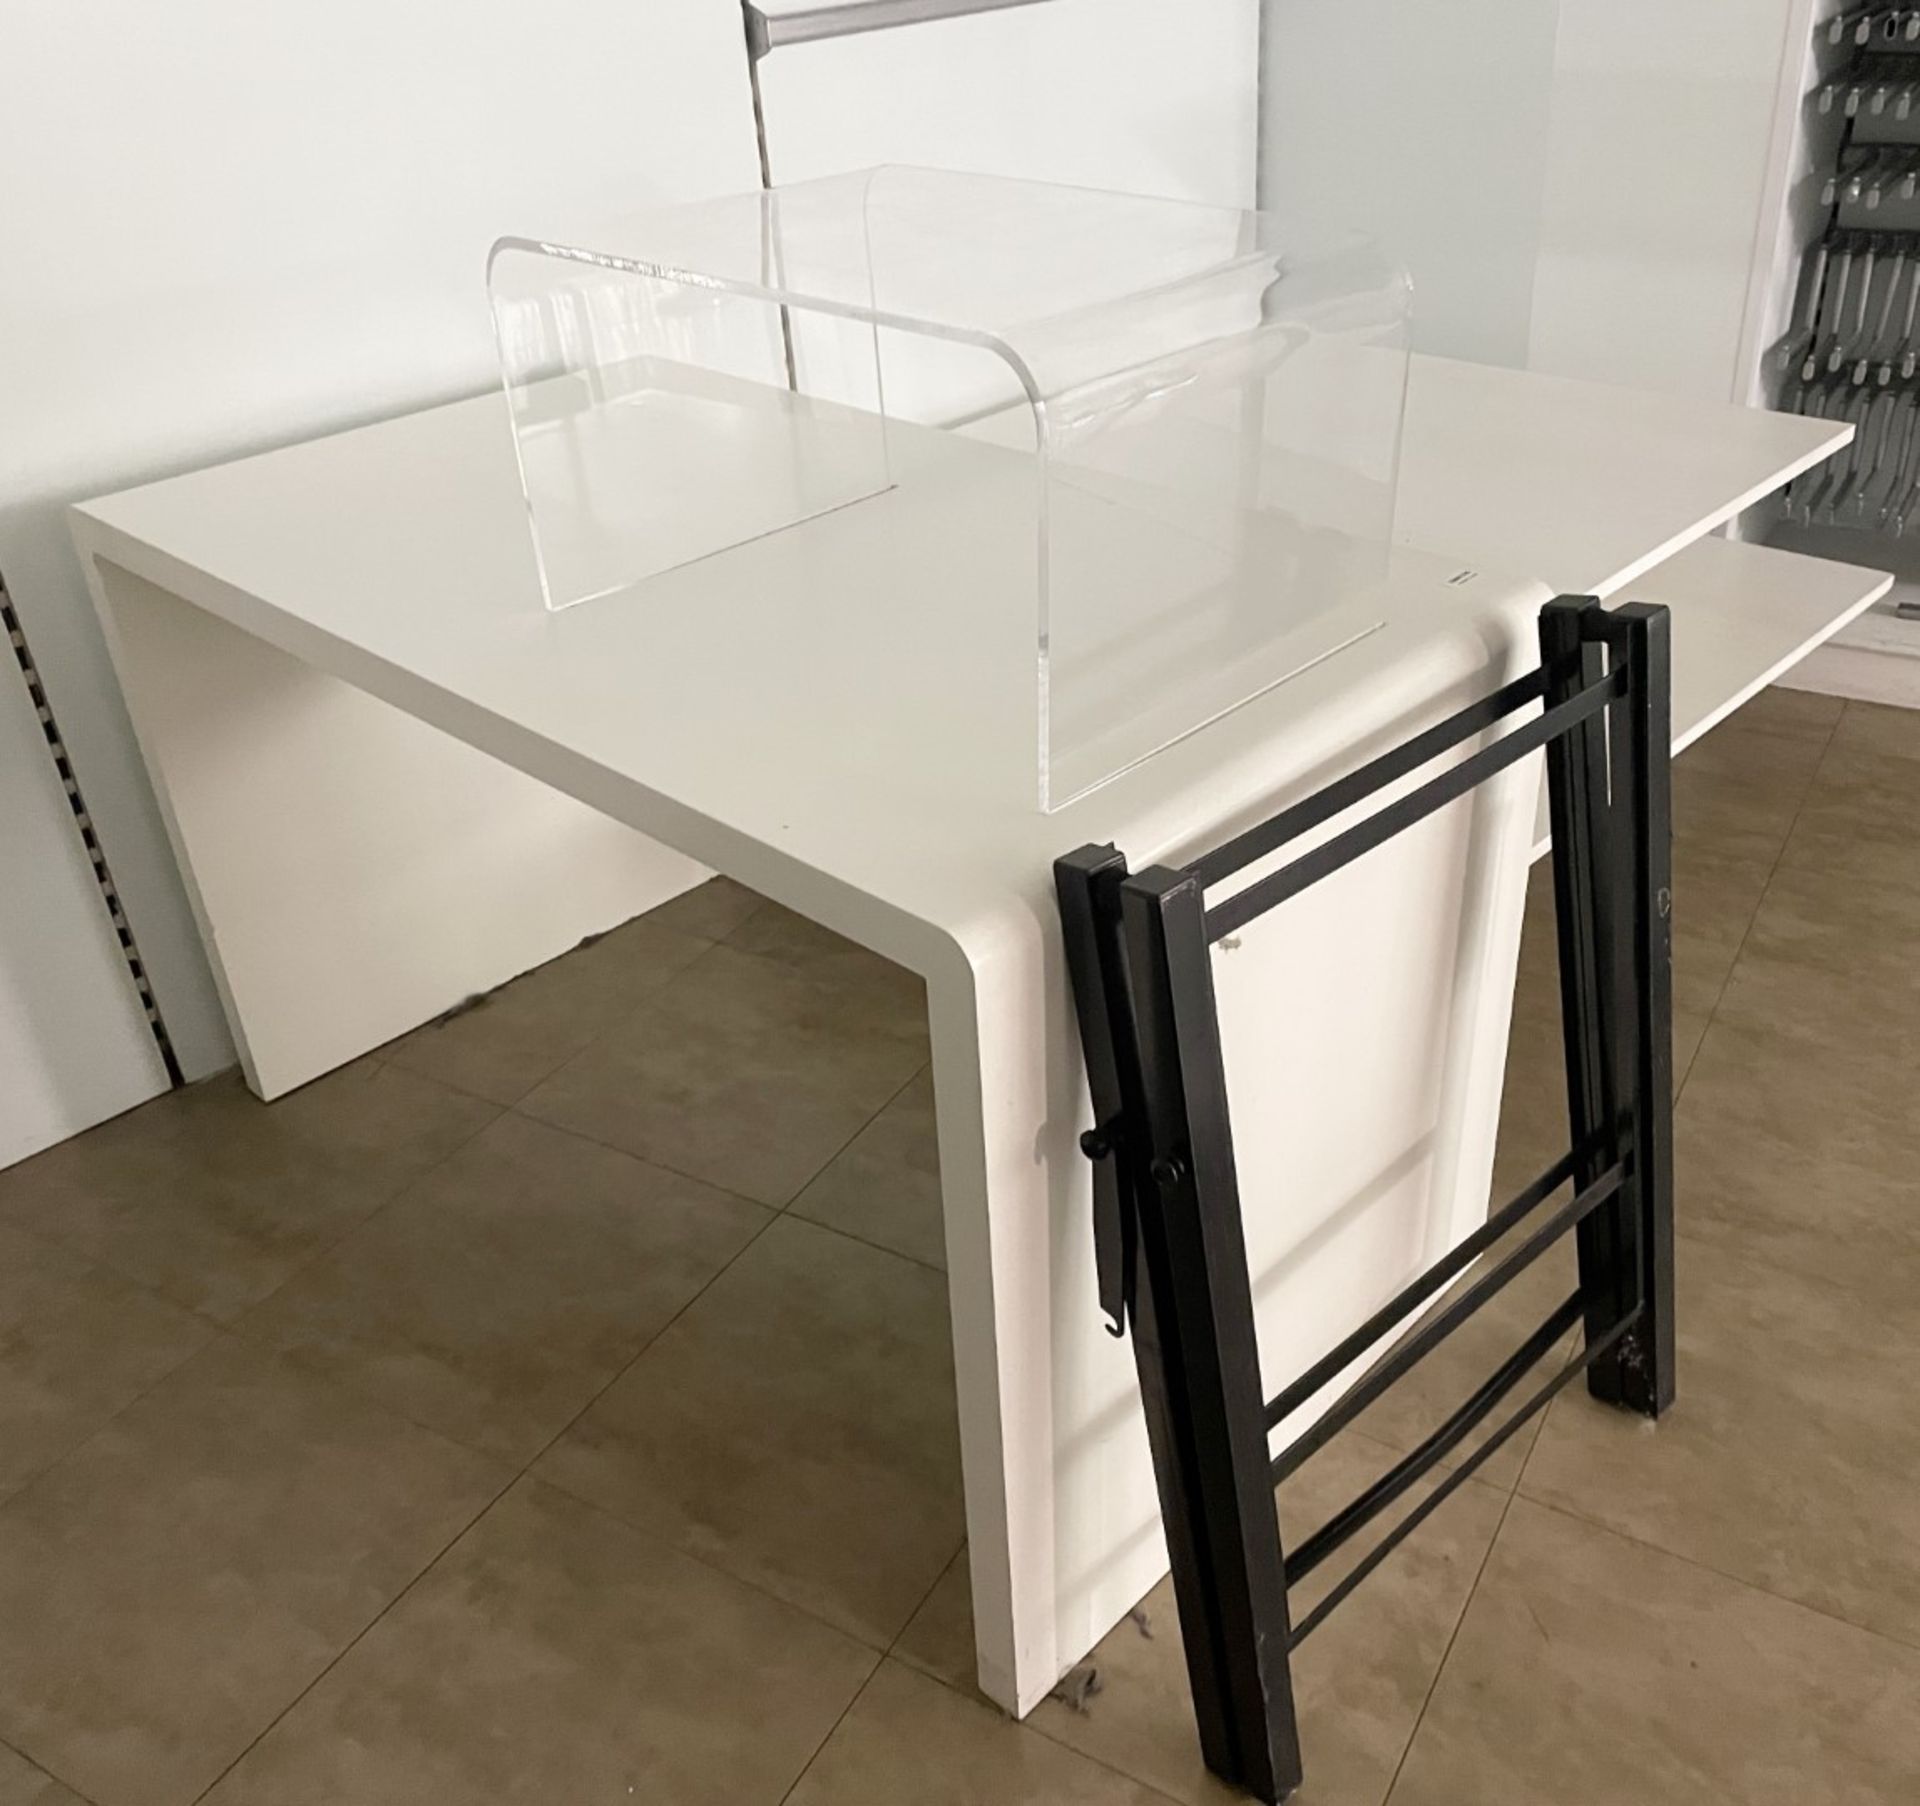 4 x Retail Display Units Including Acrylic Table, Low Two Tier Display - CL670 - Ref: GEM195 -